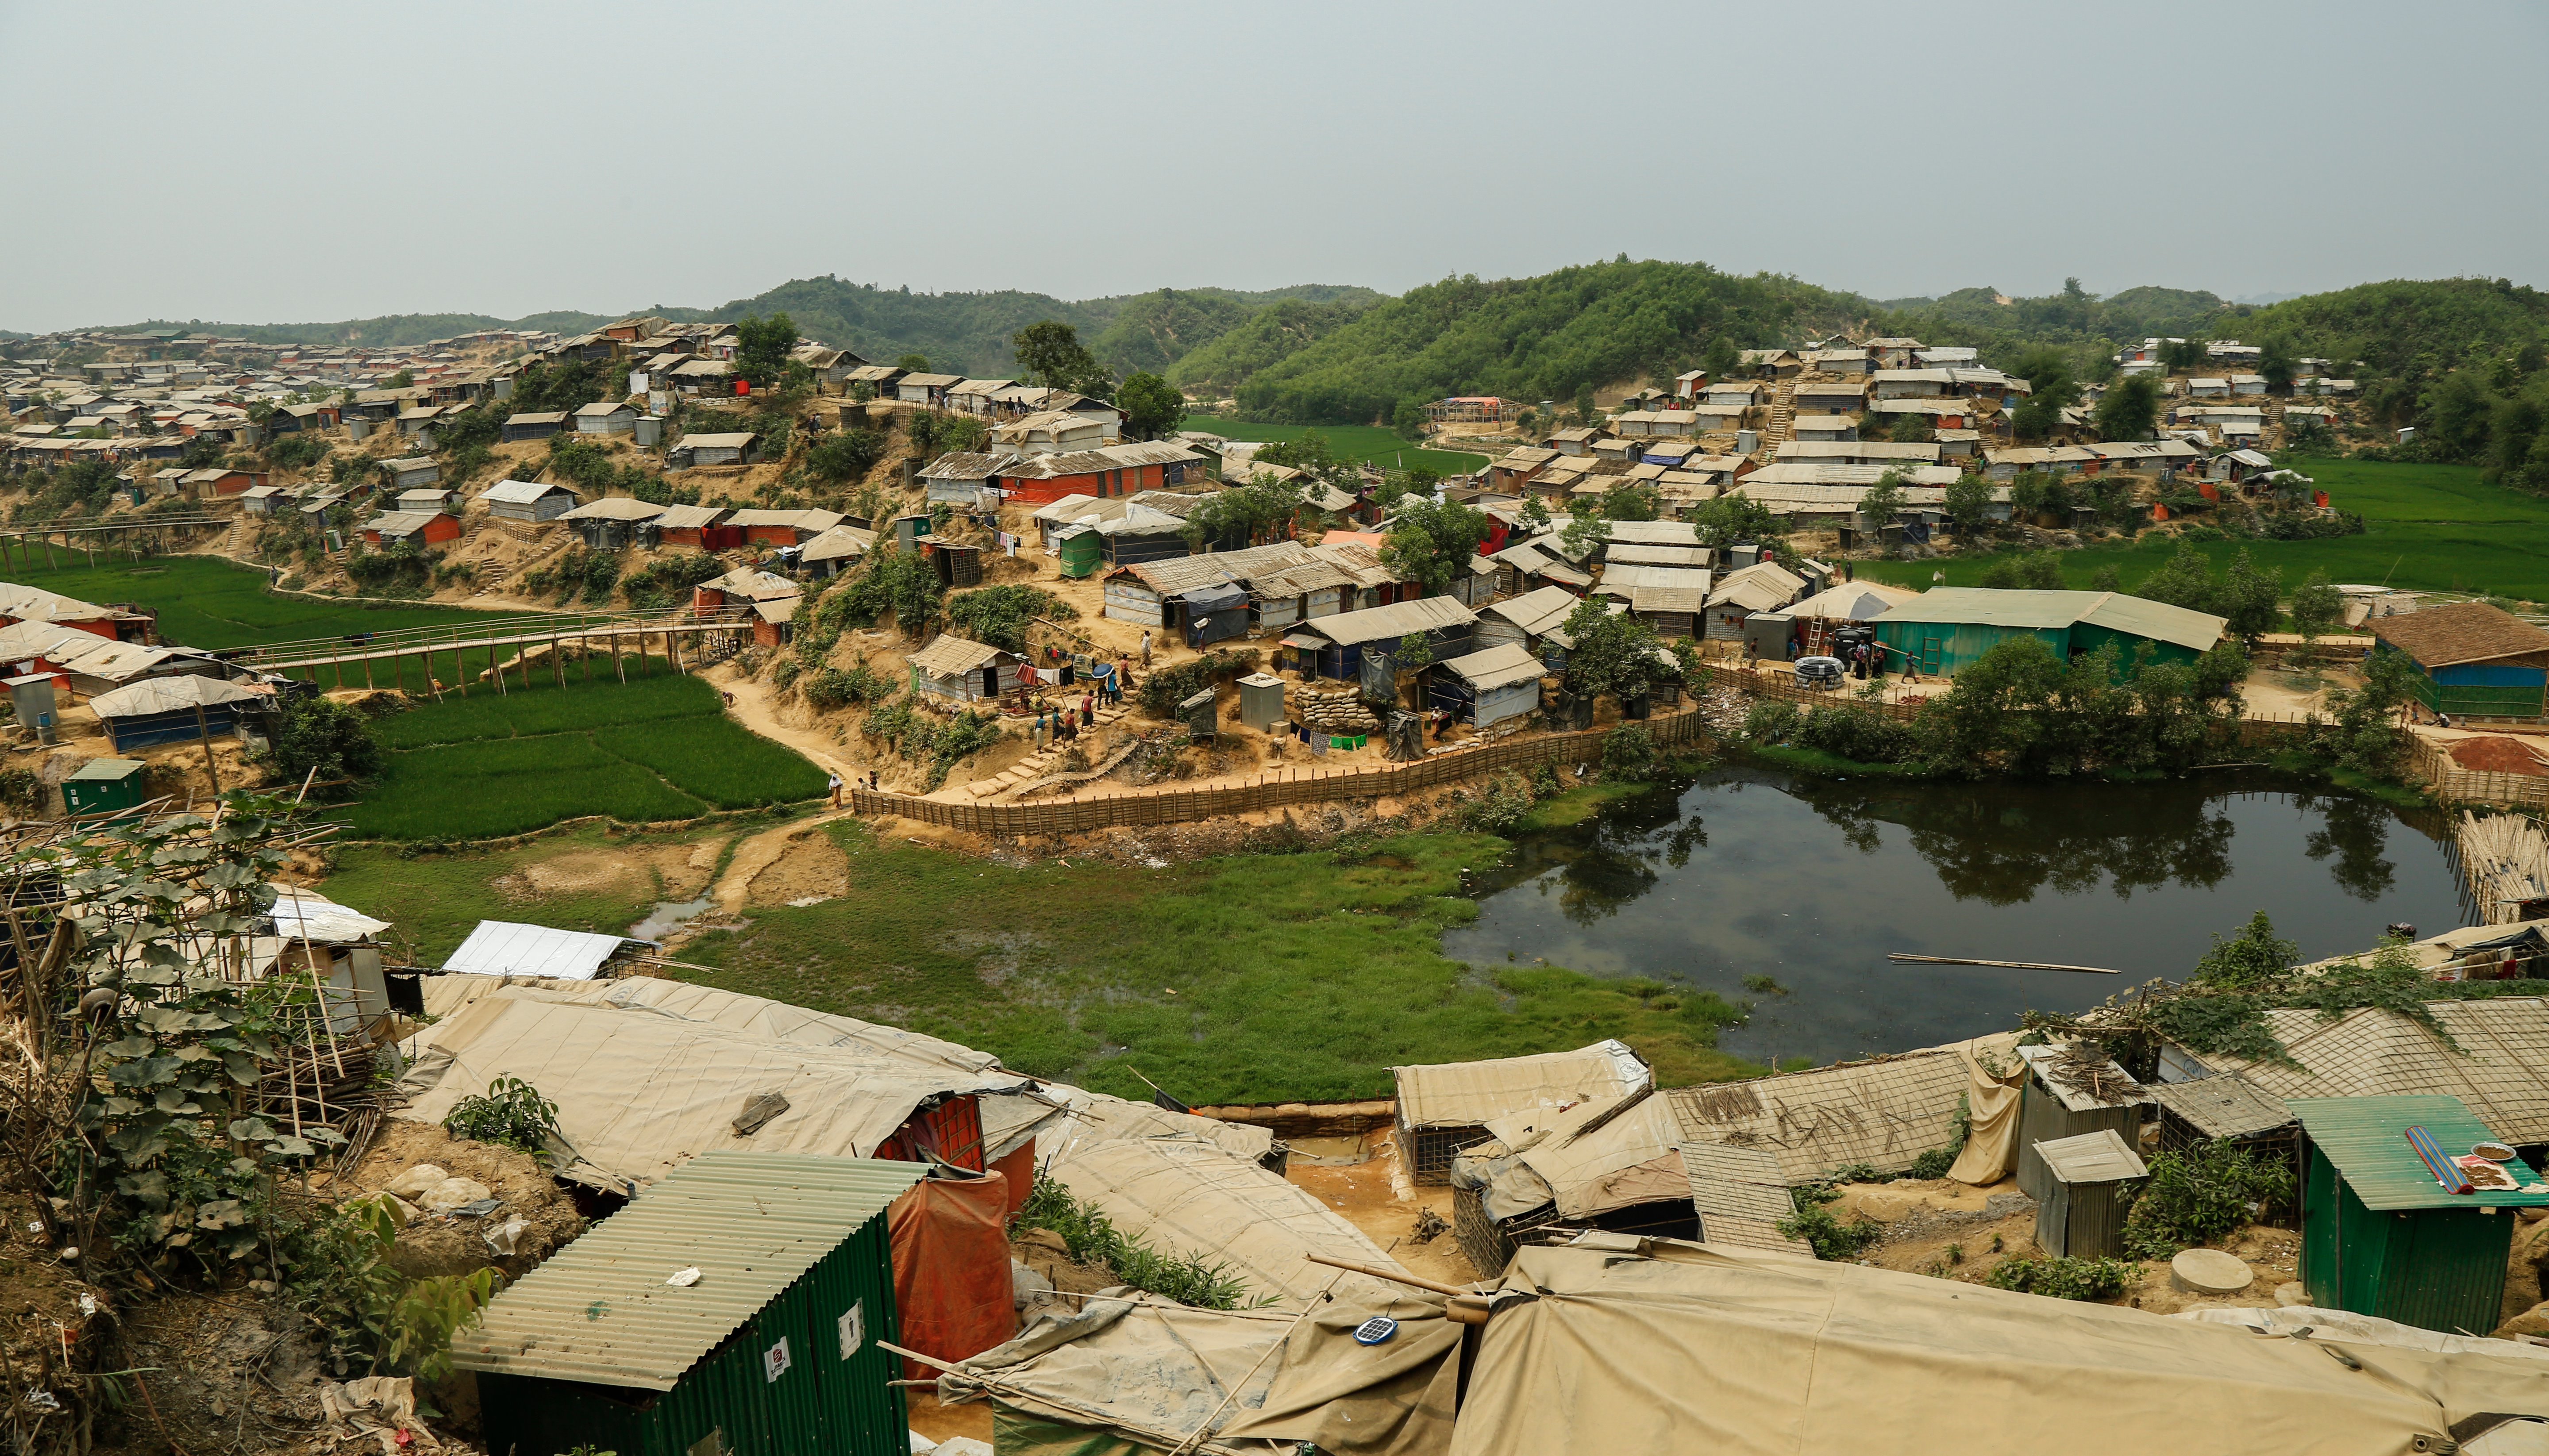 Read Building resilient communities in Cox’s Bazar by UNDP Bangladesh